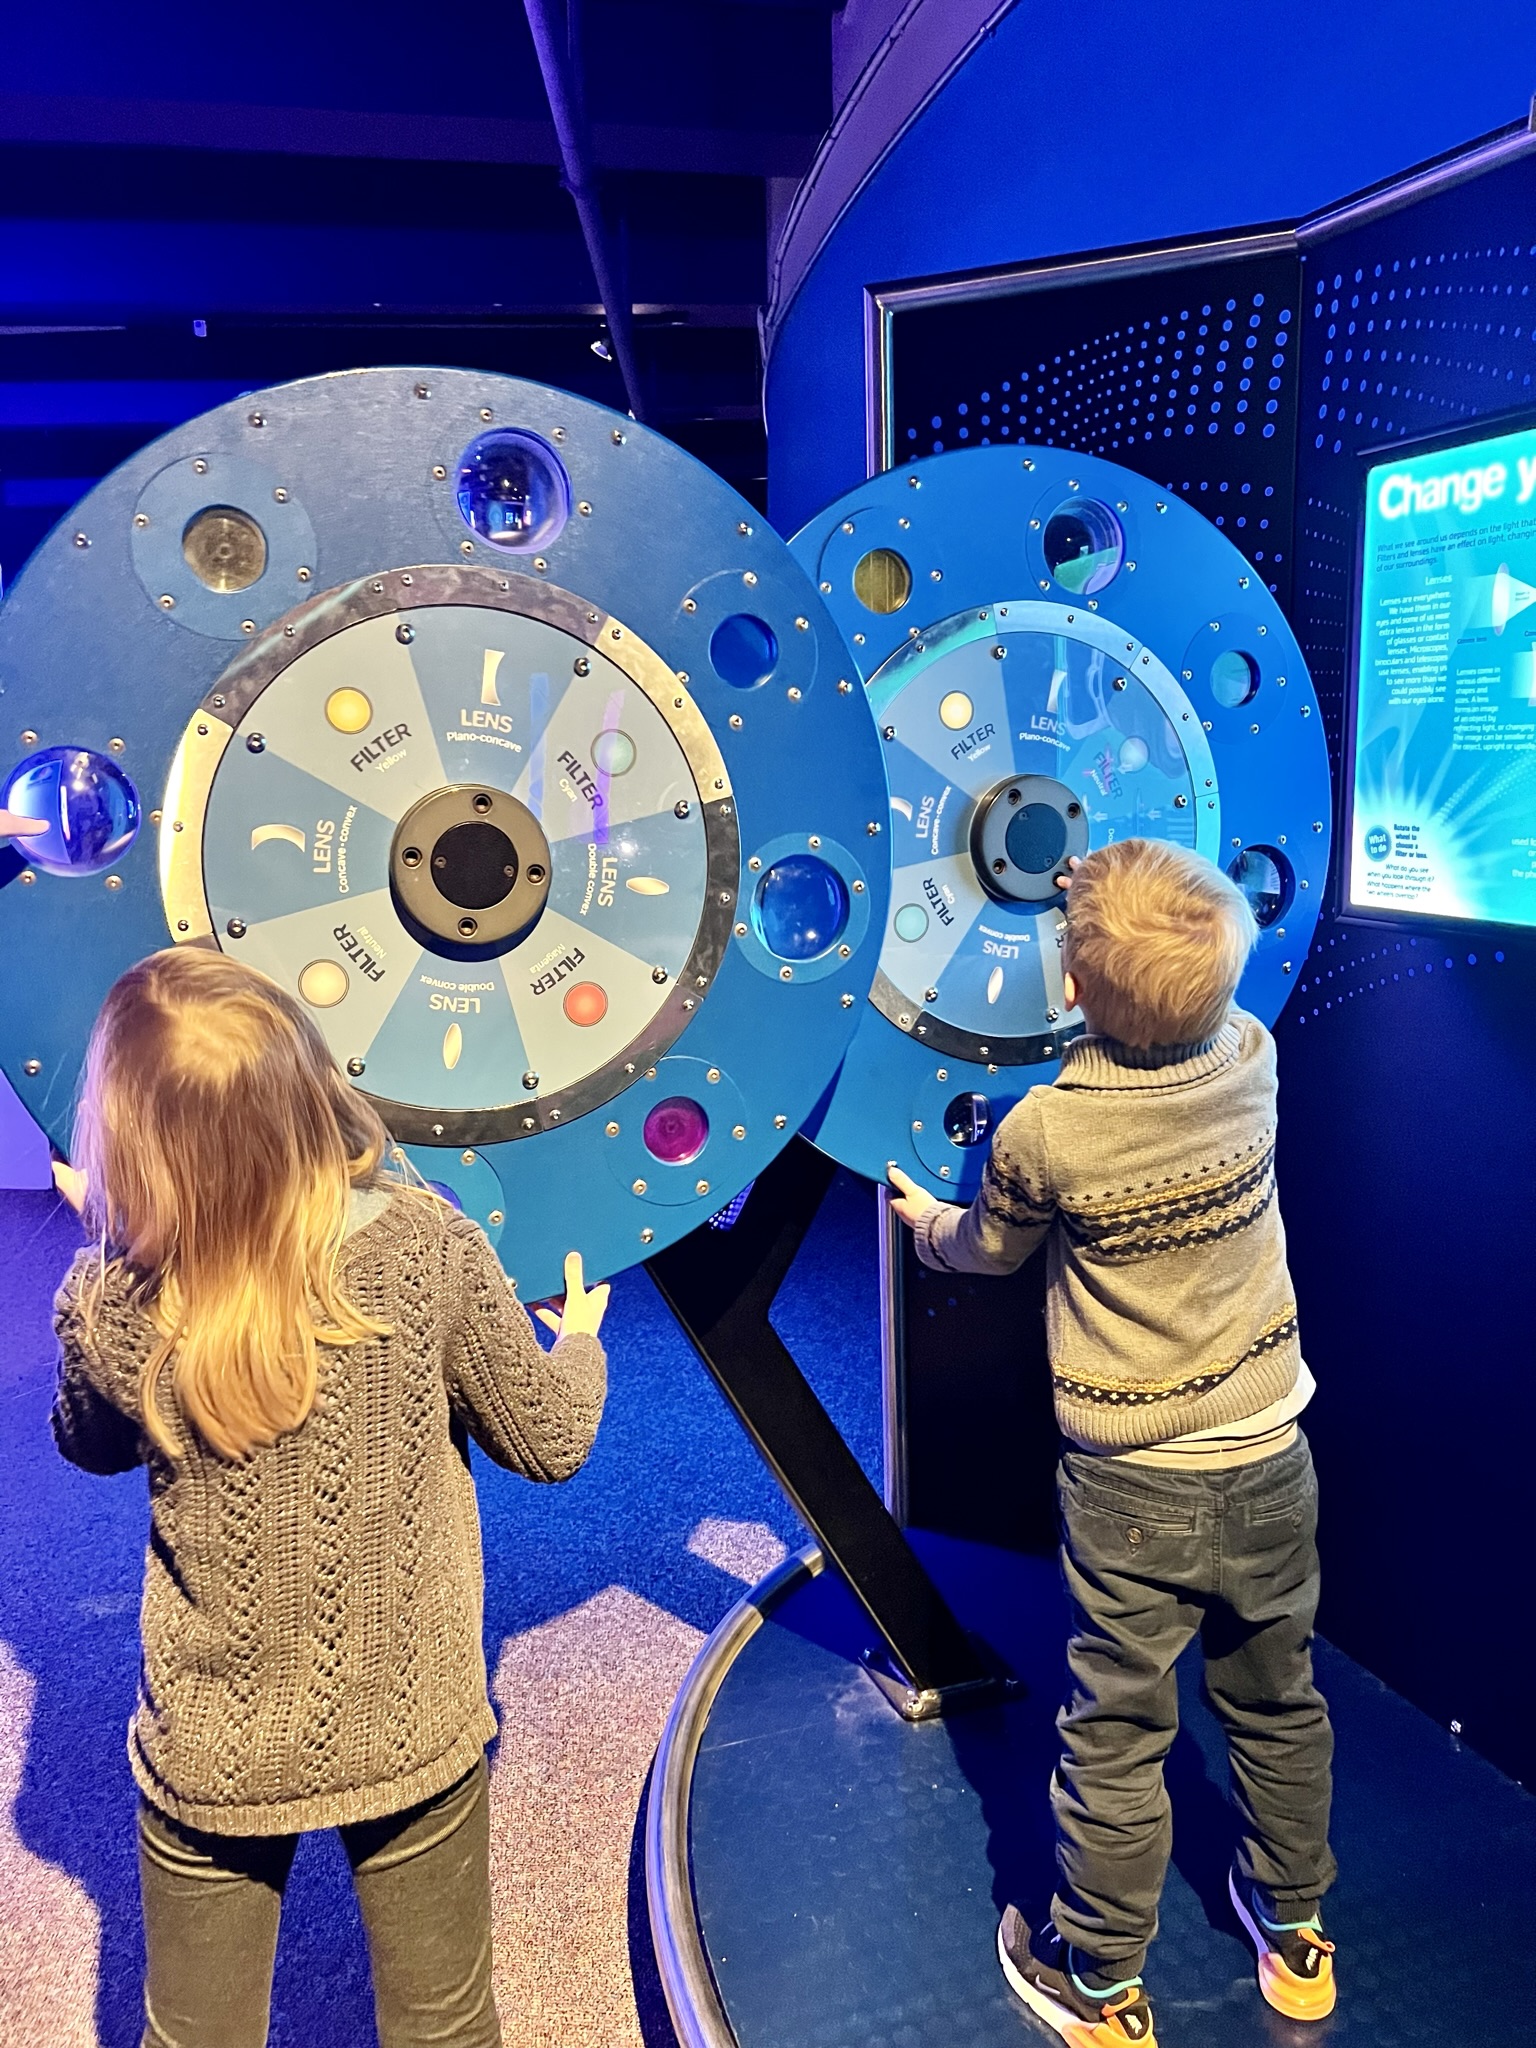 Kids learning about light at Science Museum of Virginia